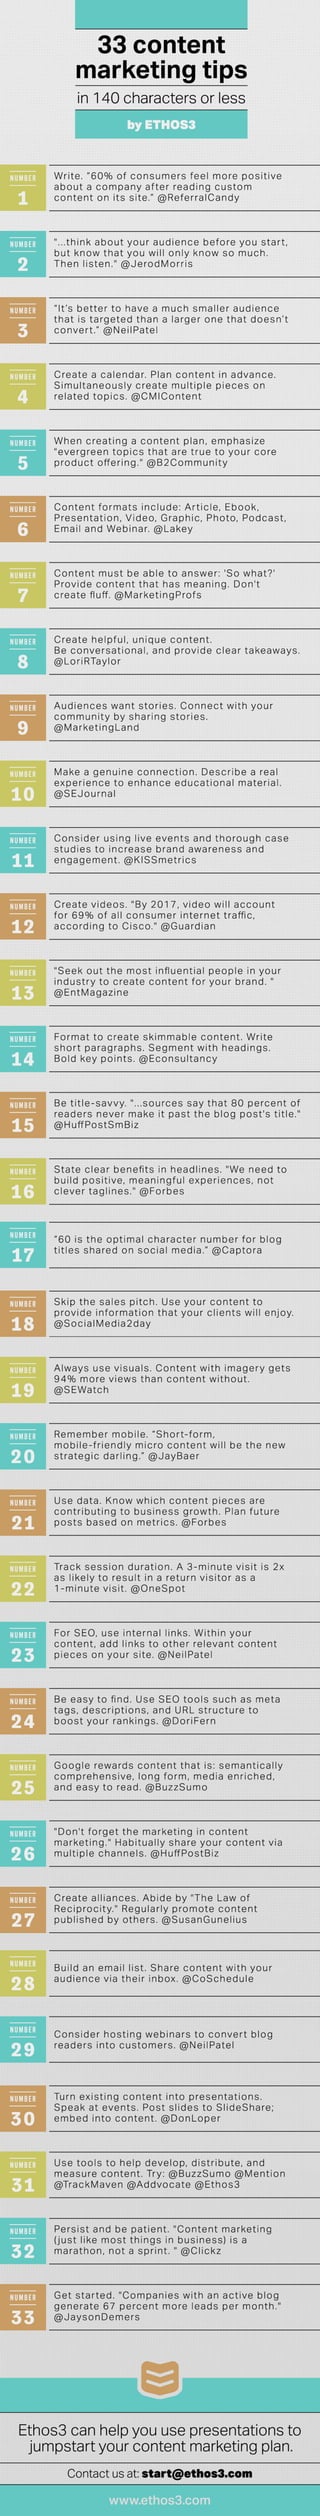 33 Content Marketing Tips, in 140 characters or less